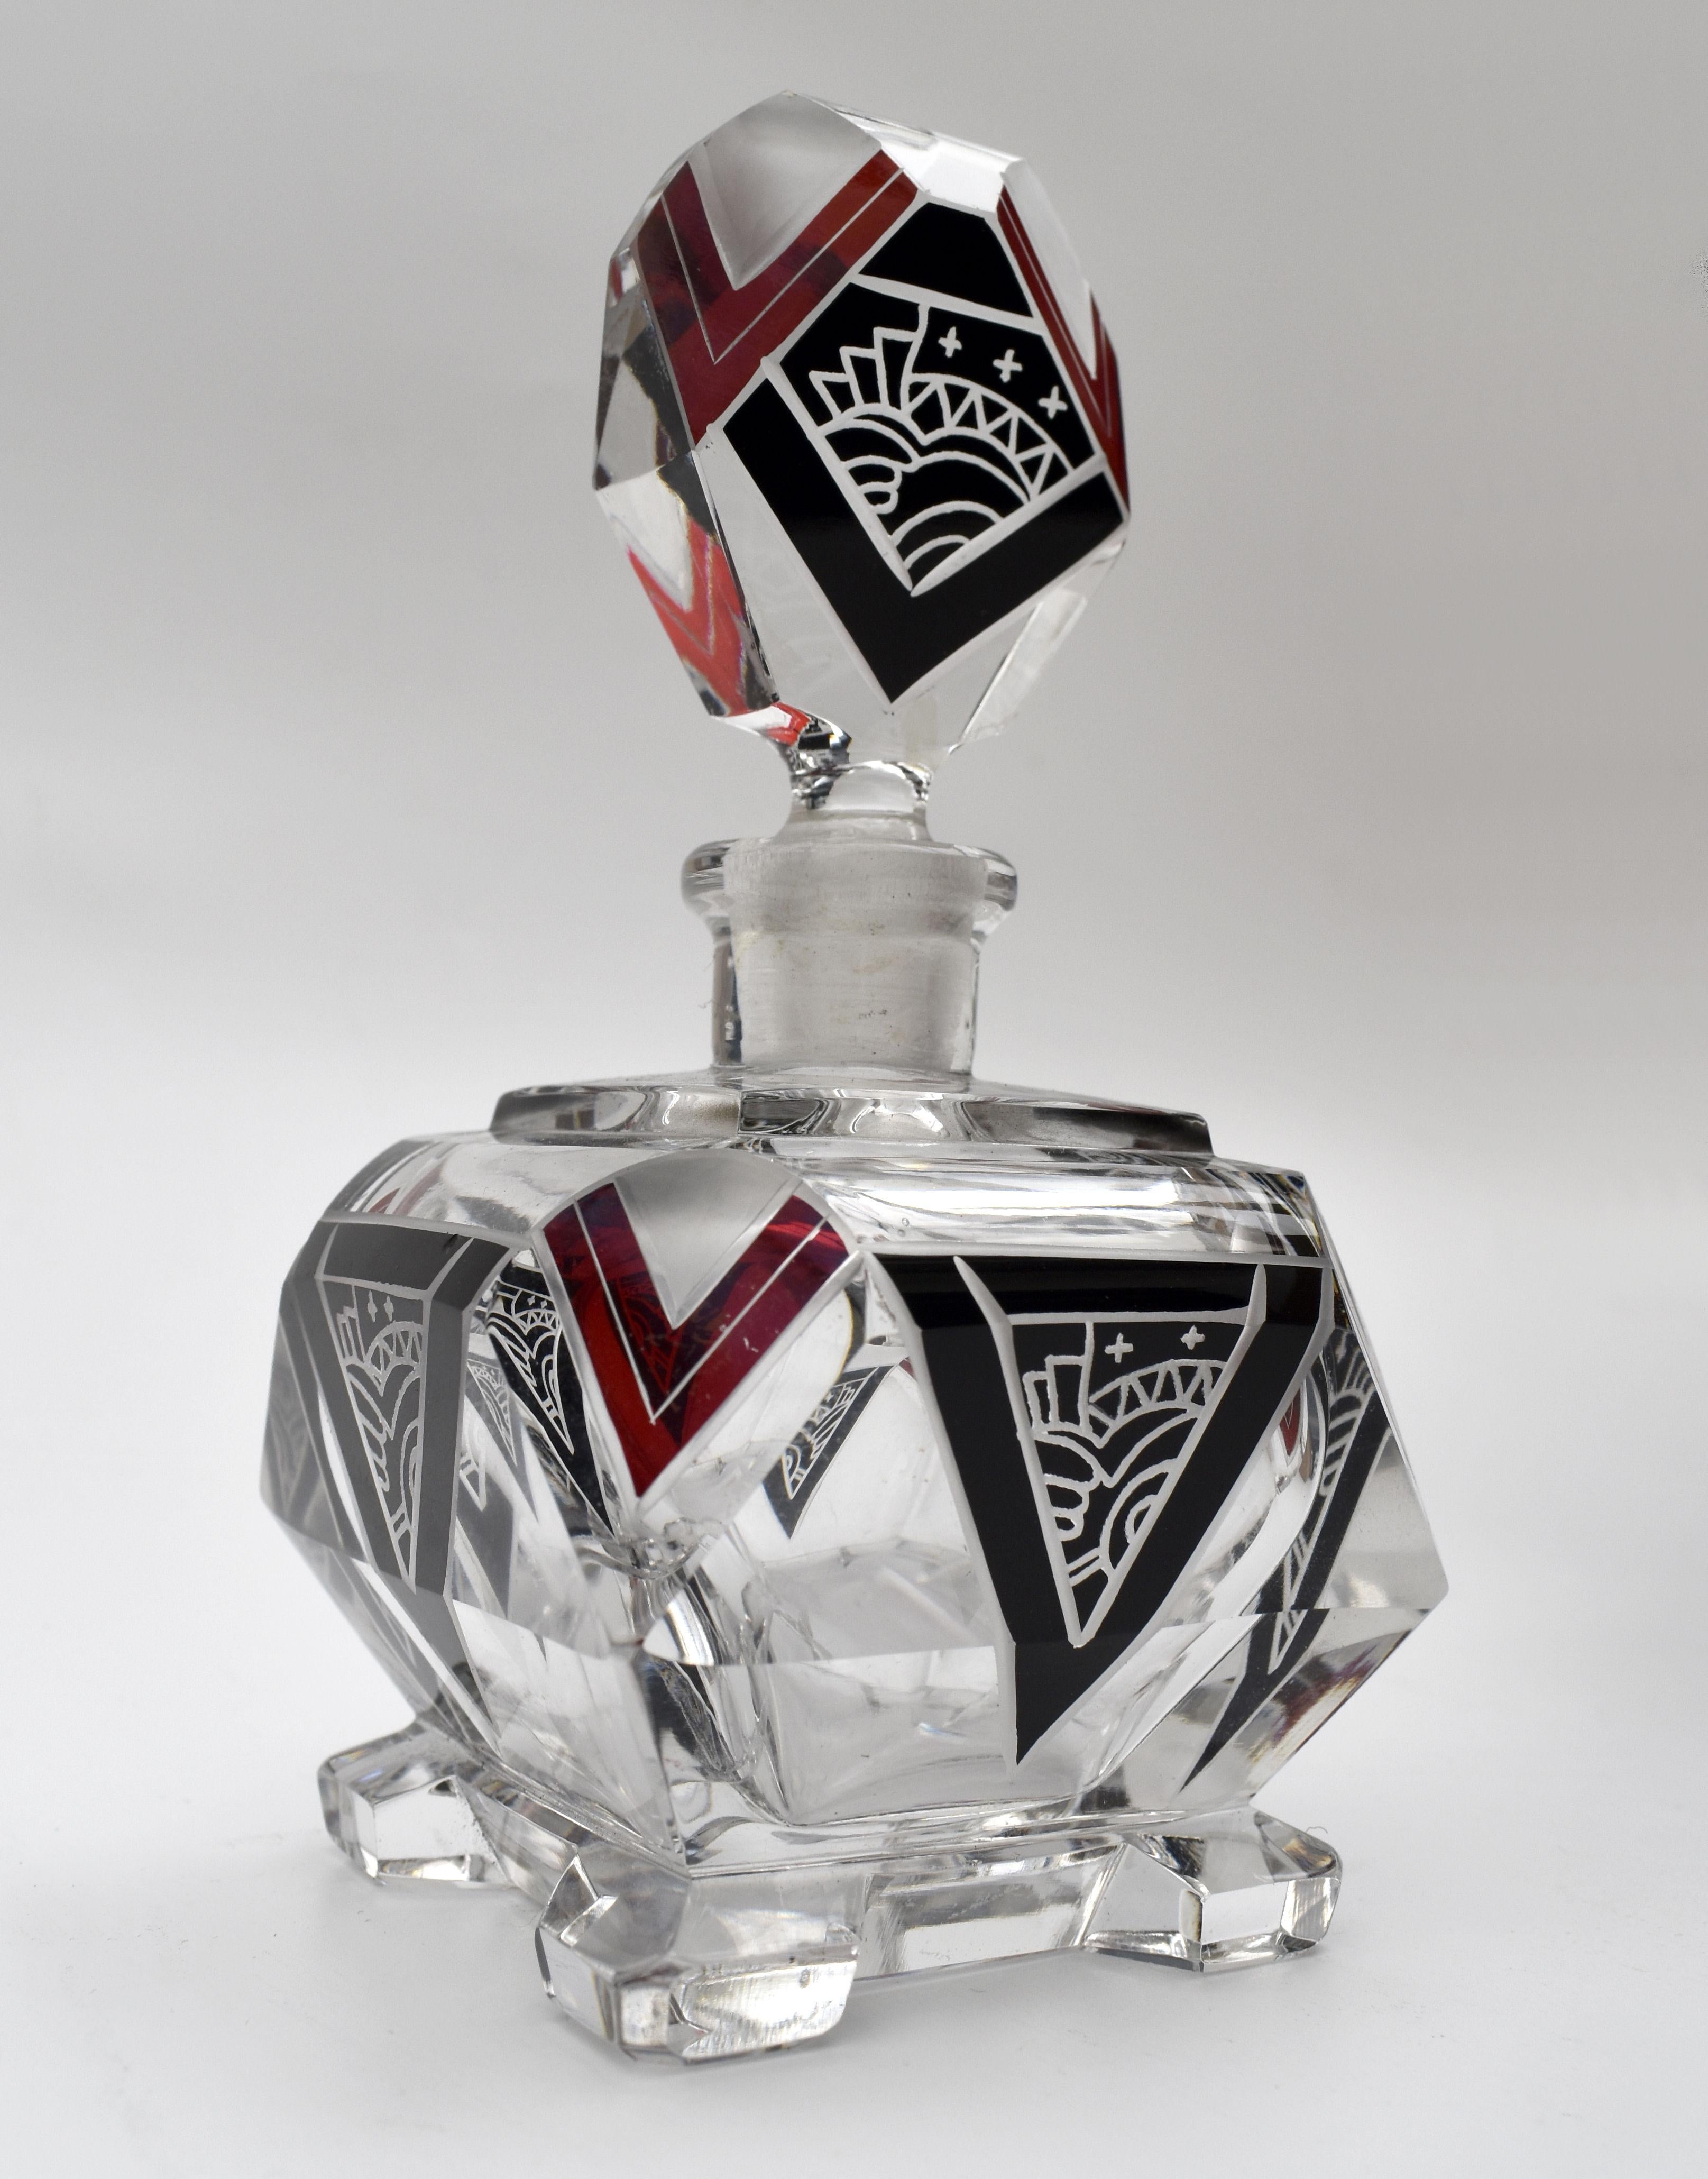 For your consideration is this wonderful Art Deco cut glass scent bottle with a very attractive and iconic shape and patterning with geometric dark red & black enamel decoration with acid etched detailing to both the body of the bottle and stopper.